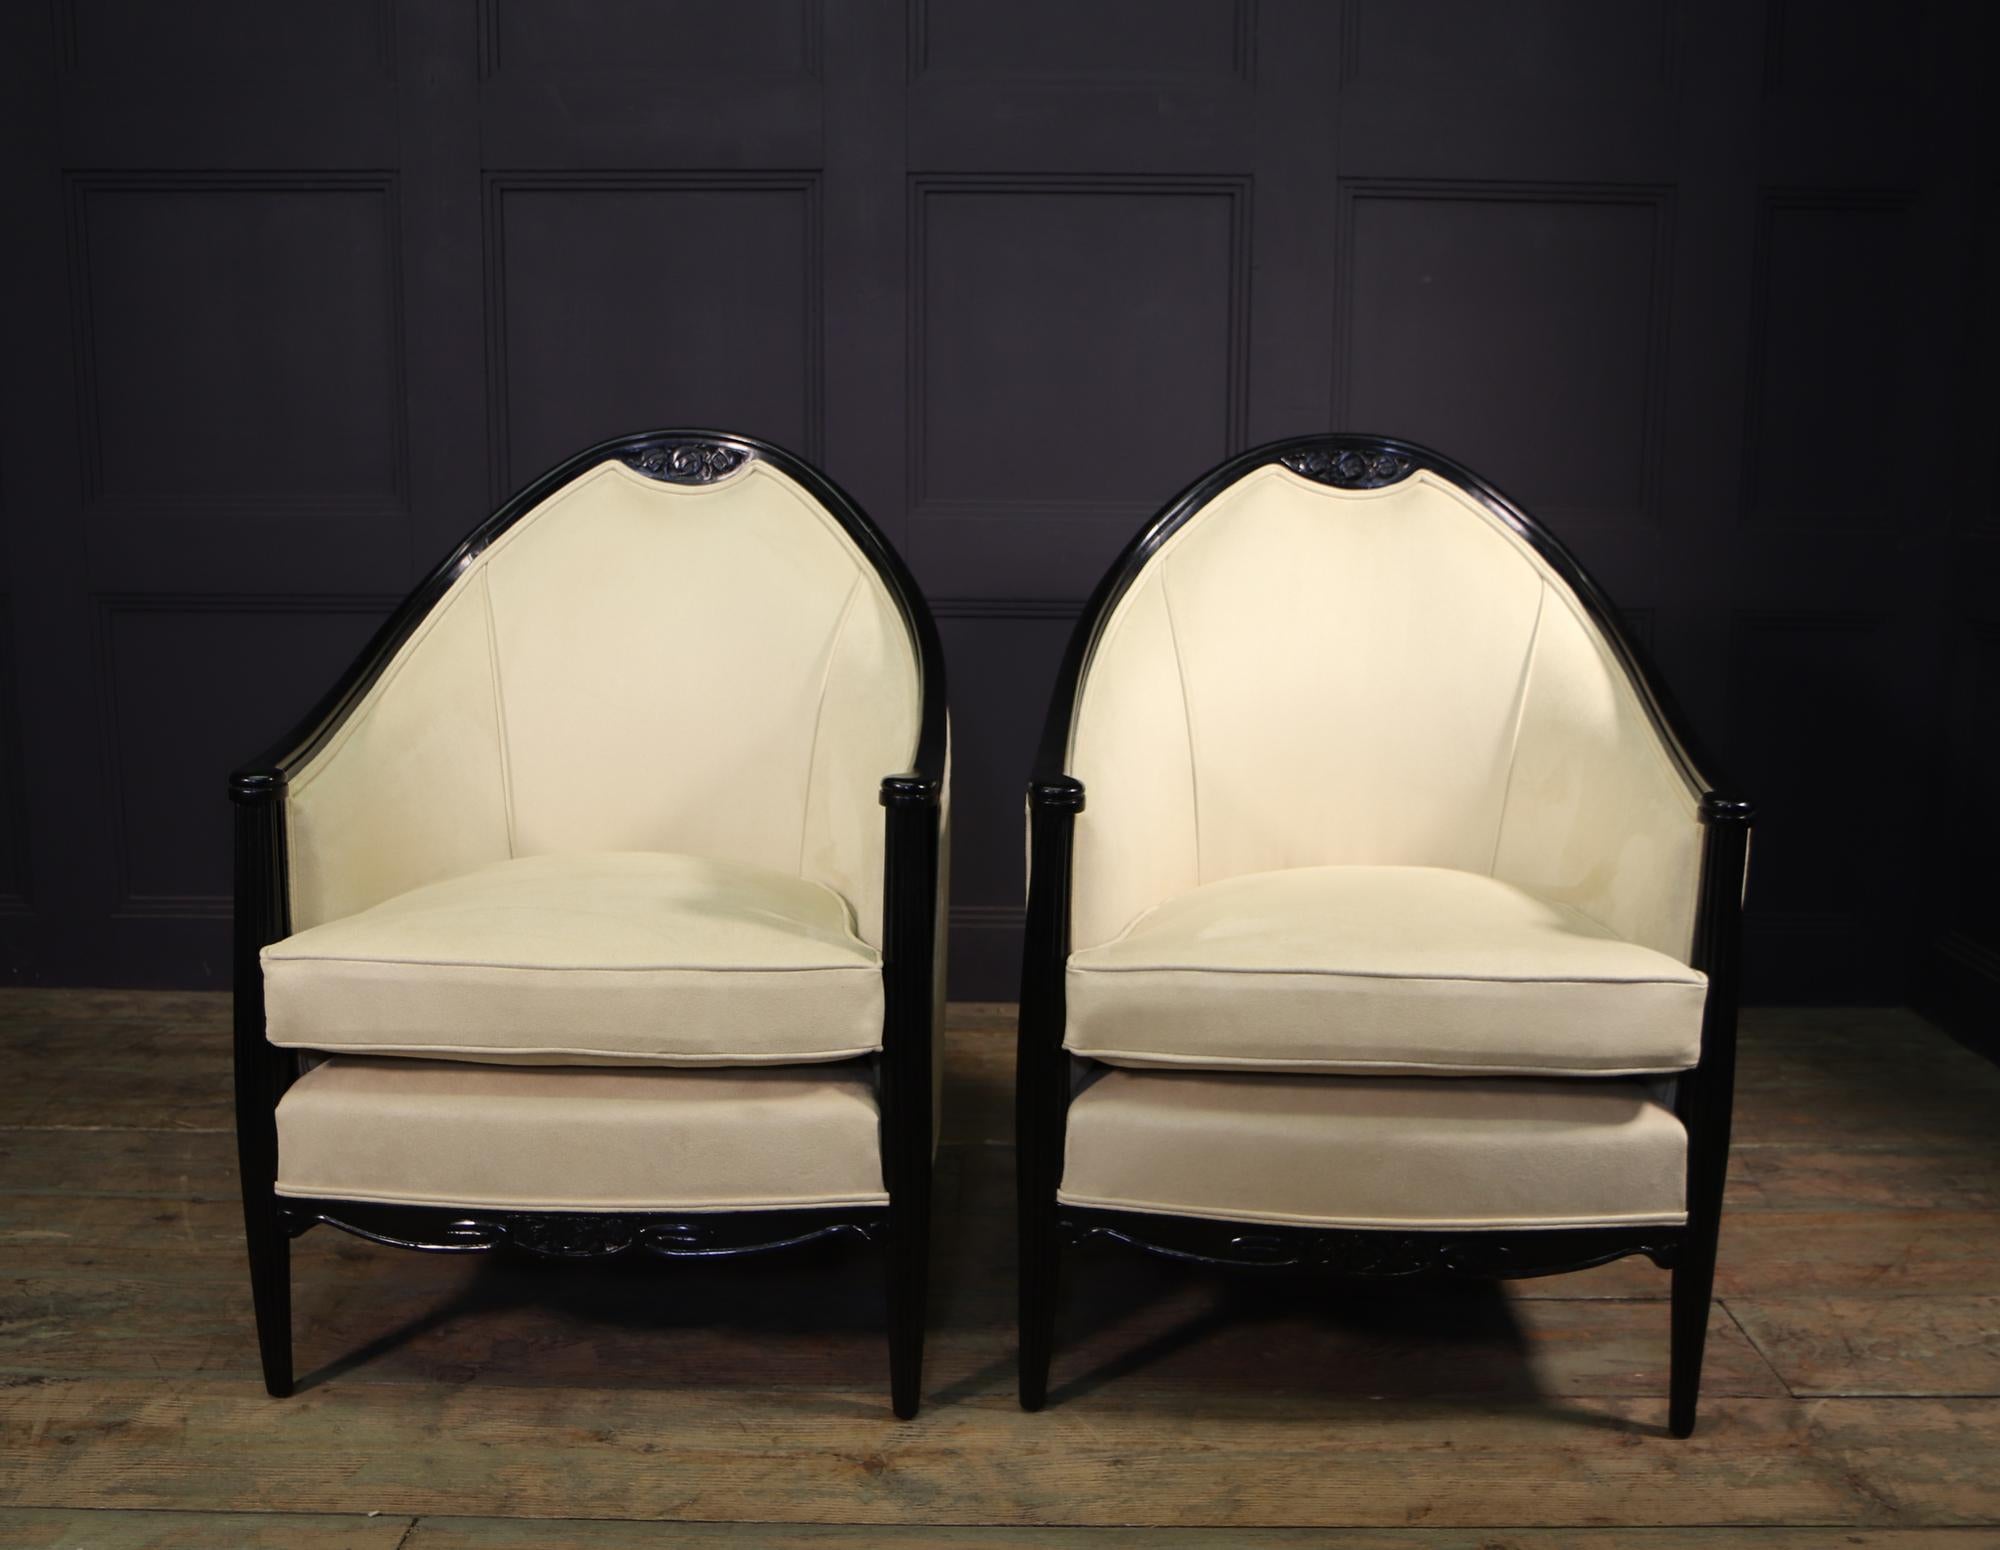 Ebonized Pair of French Art Deco Armchairs by Maurice Dufrene